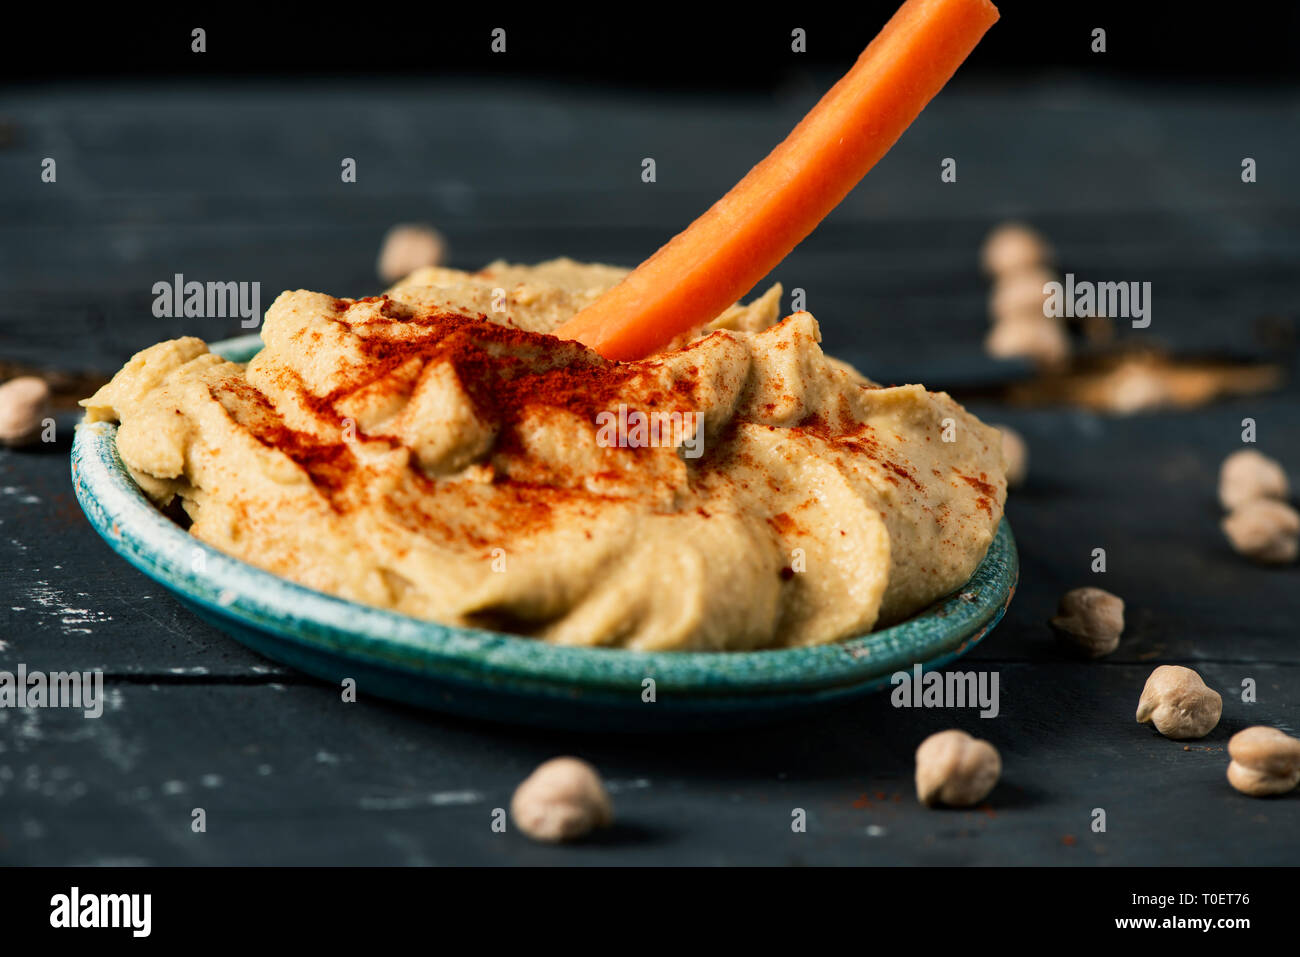 closeup of a strip of carrot being dipped in a homemade hummus seasoned with paprika served in a green ceramic plate, on a dark gray rustic wooden tab Stock Photo